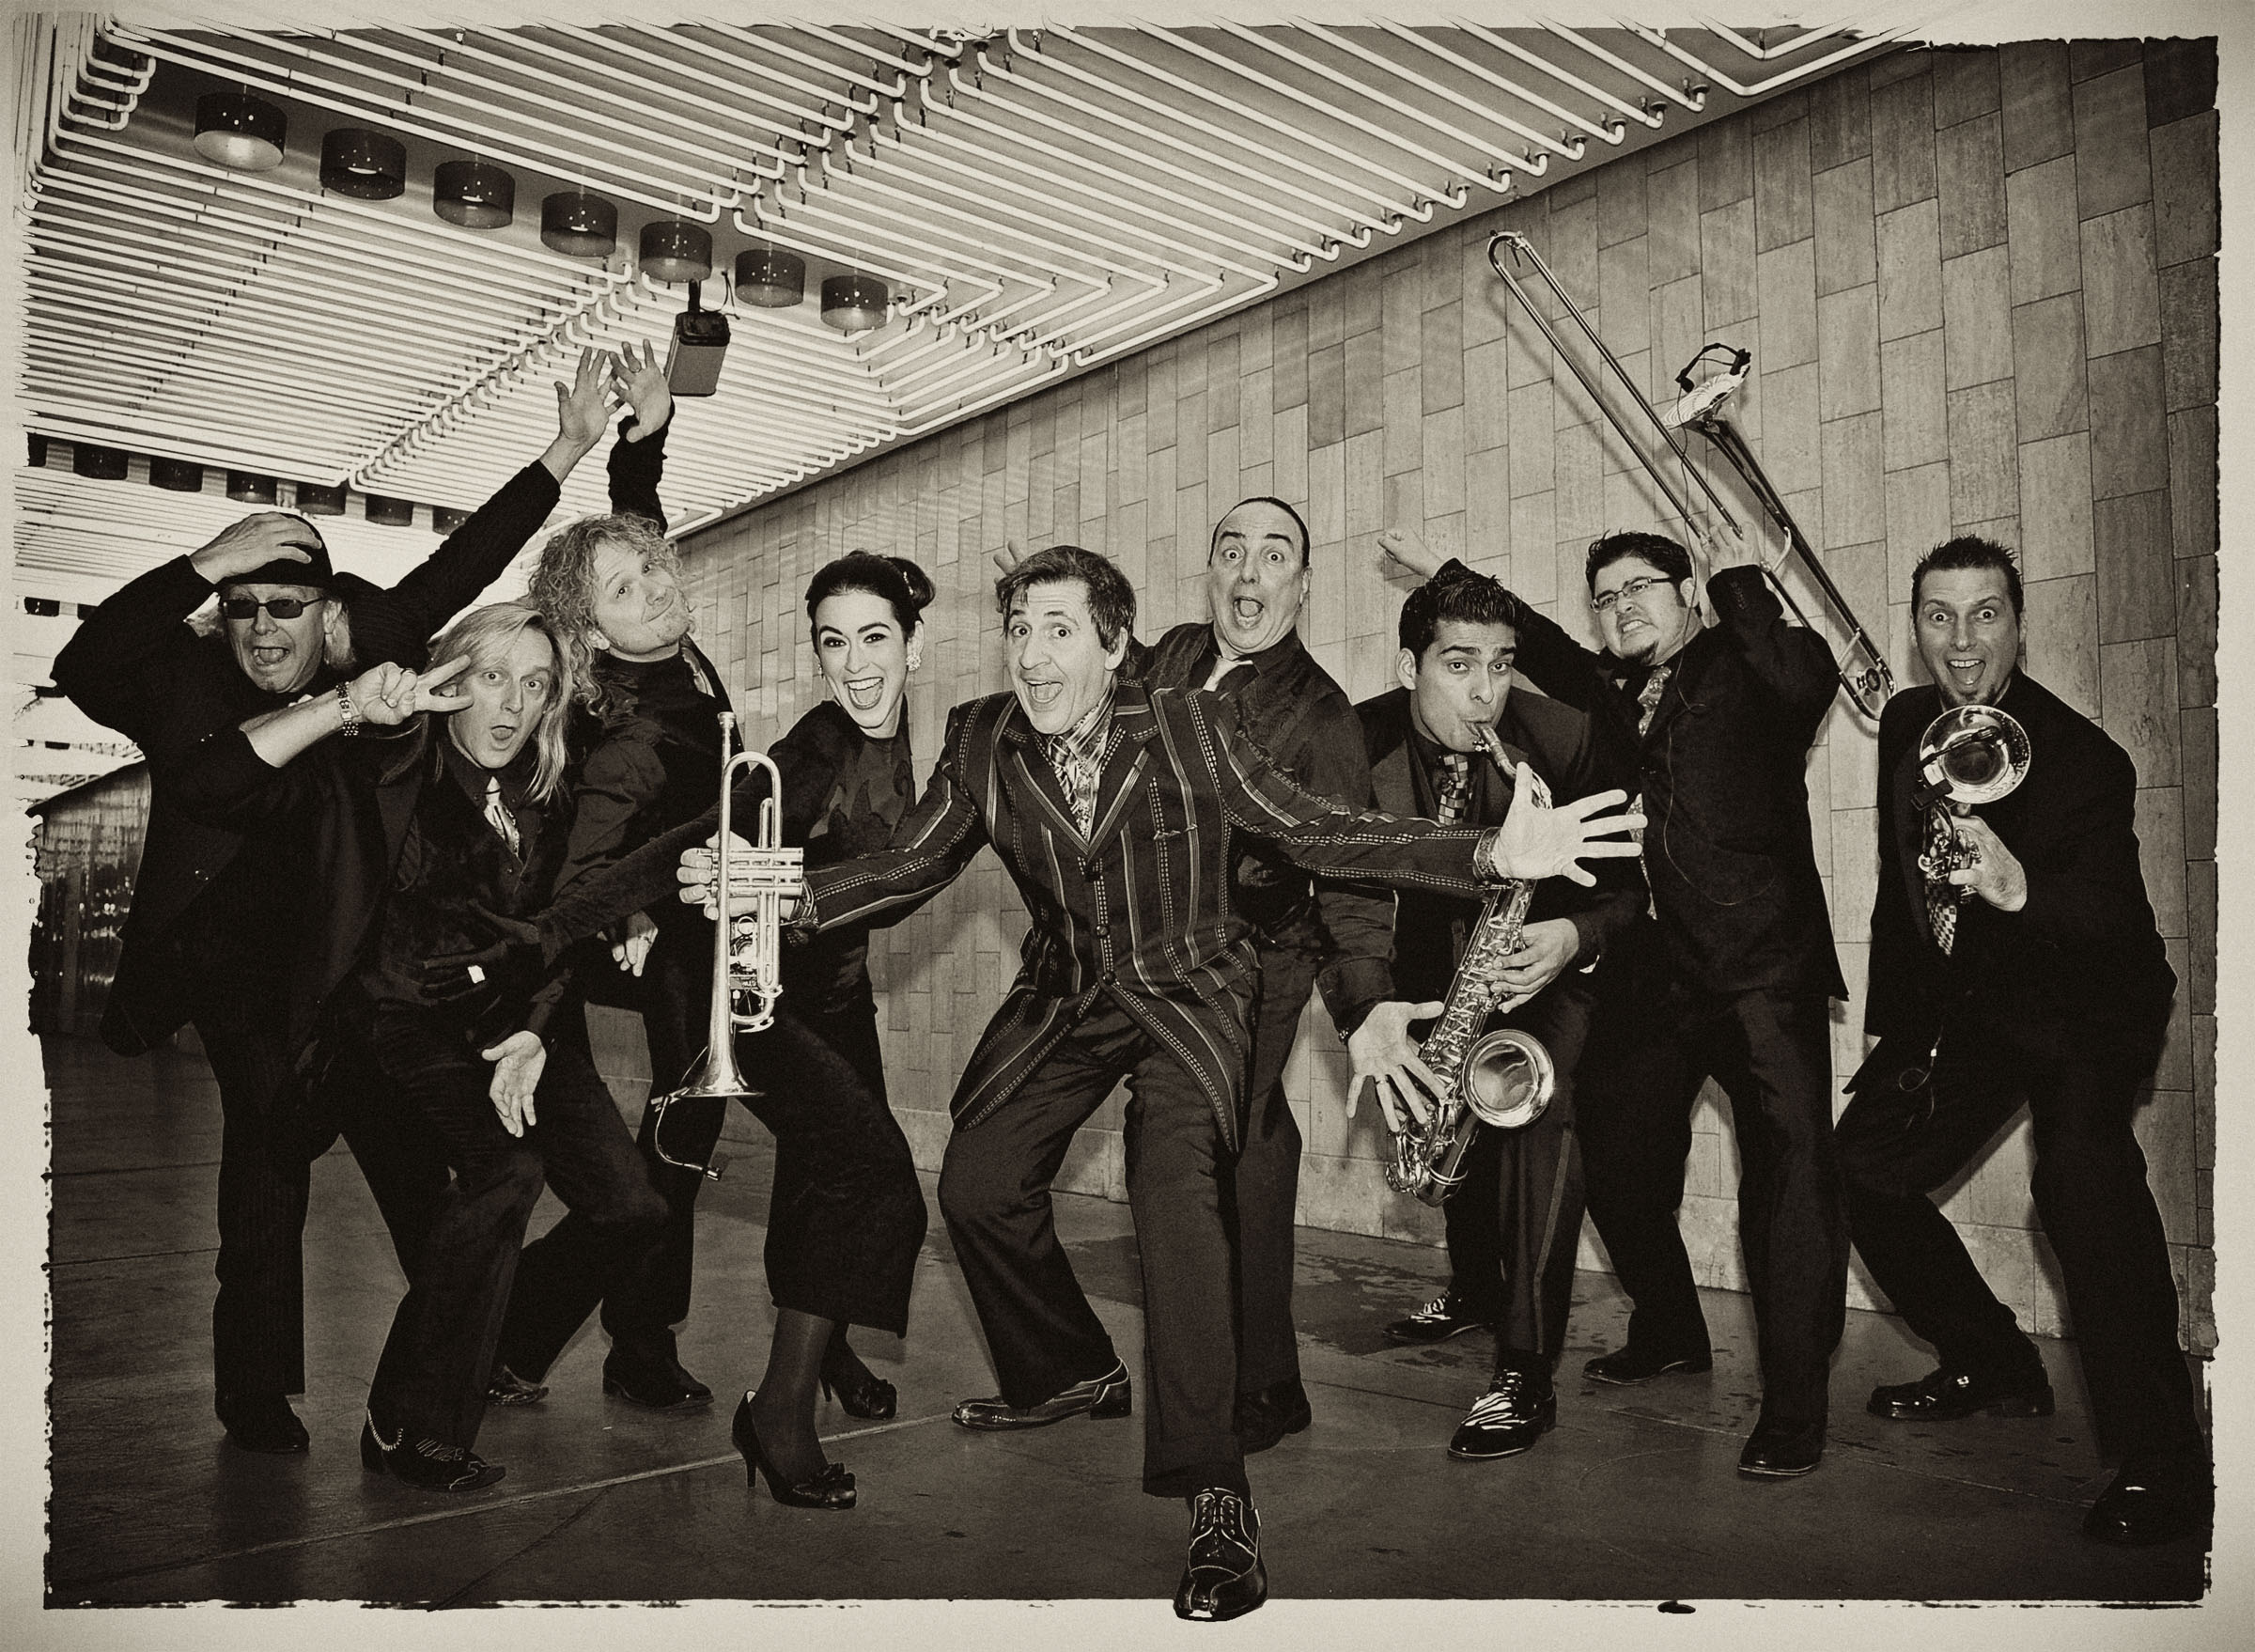 Tonight: Louis Prima Jr. and the Witnesses